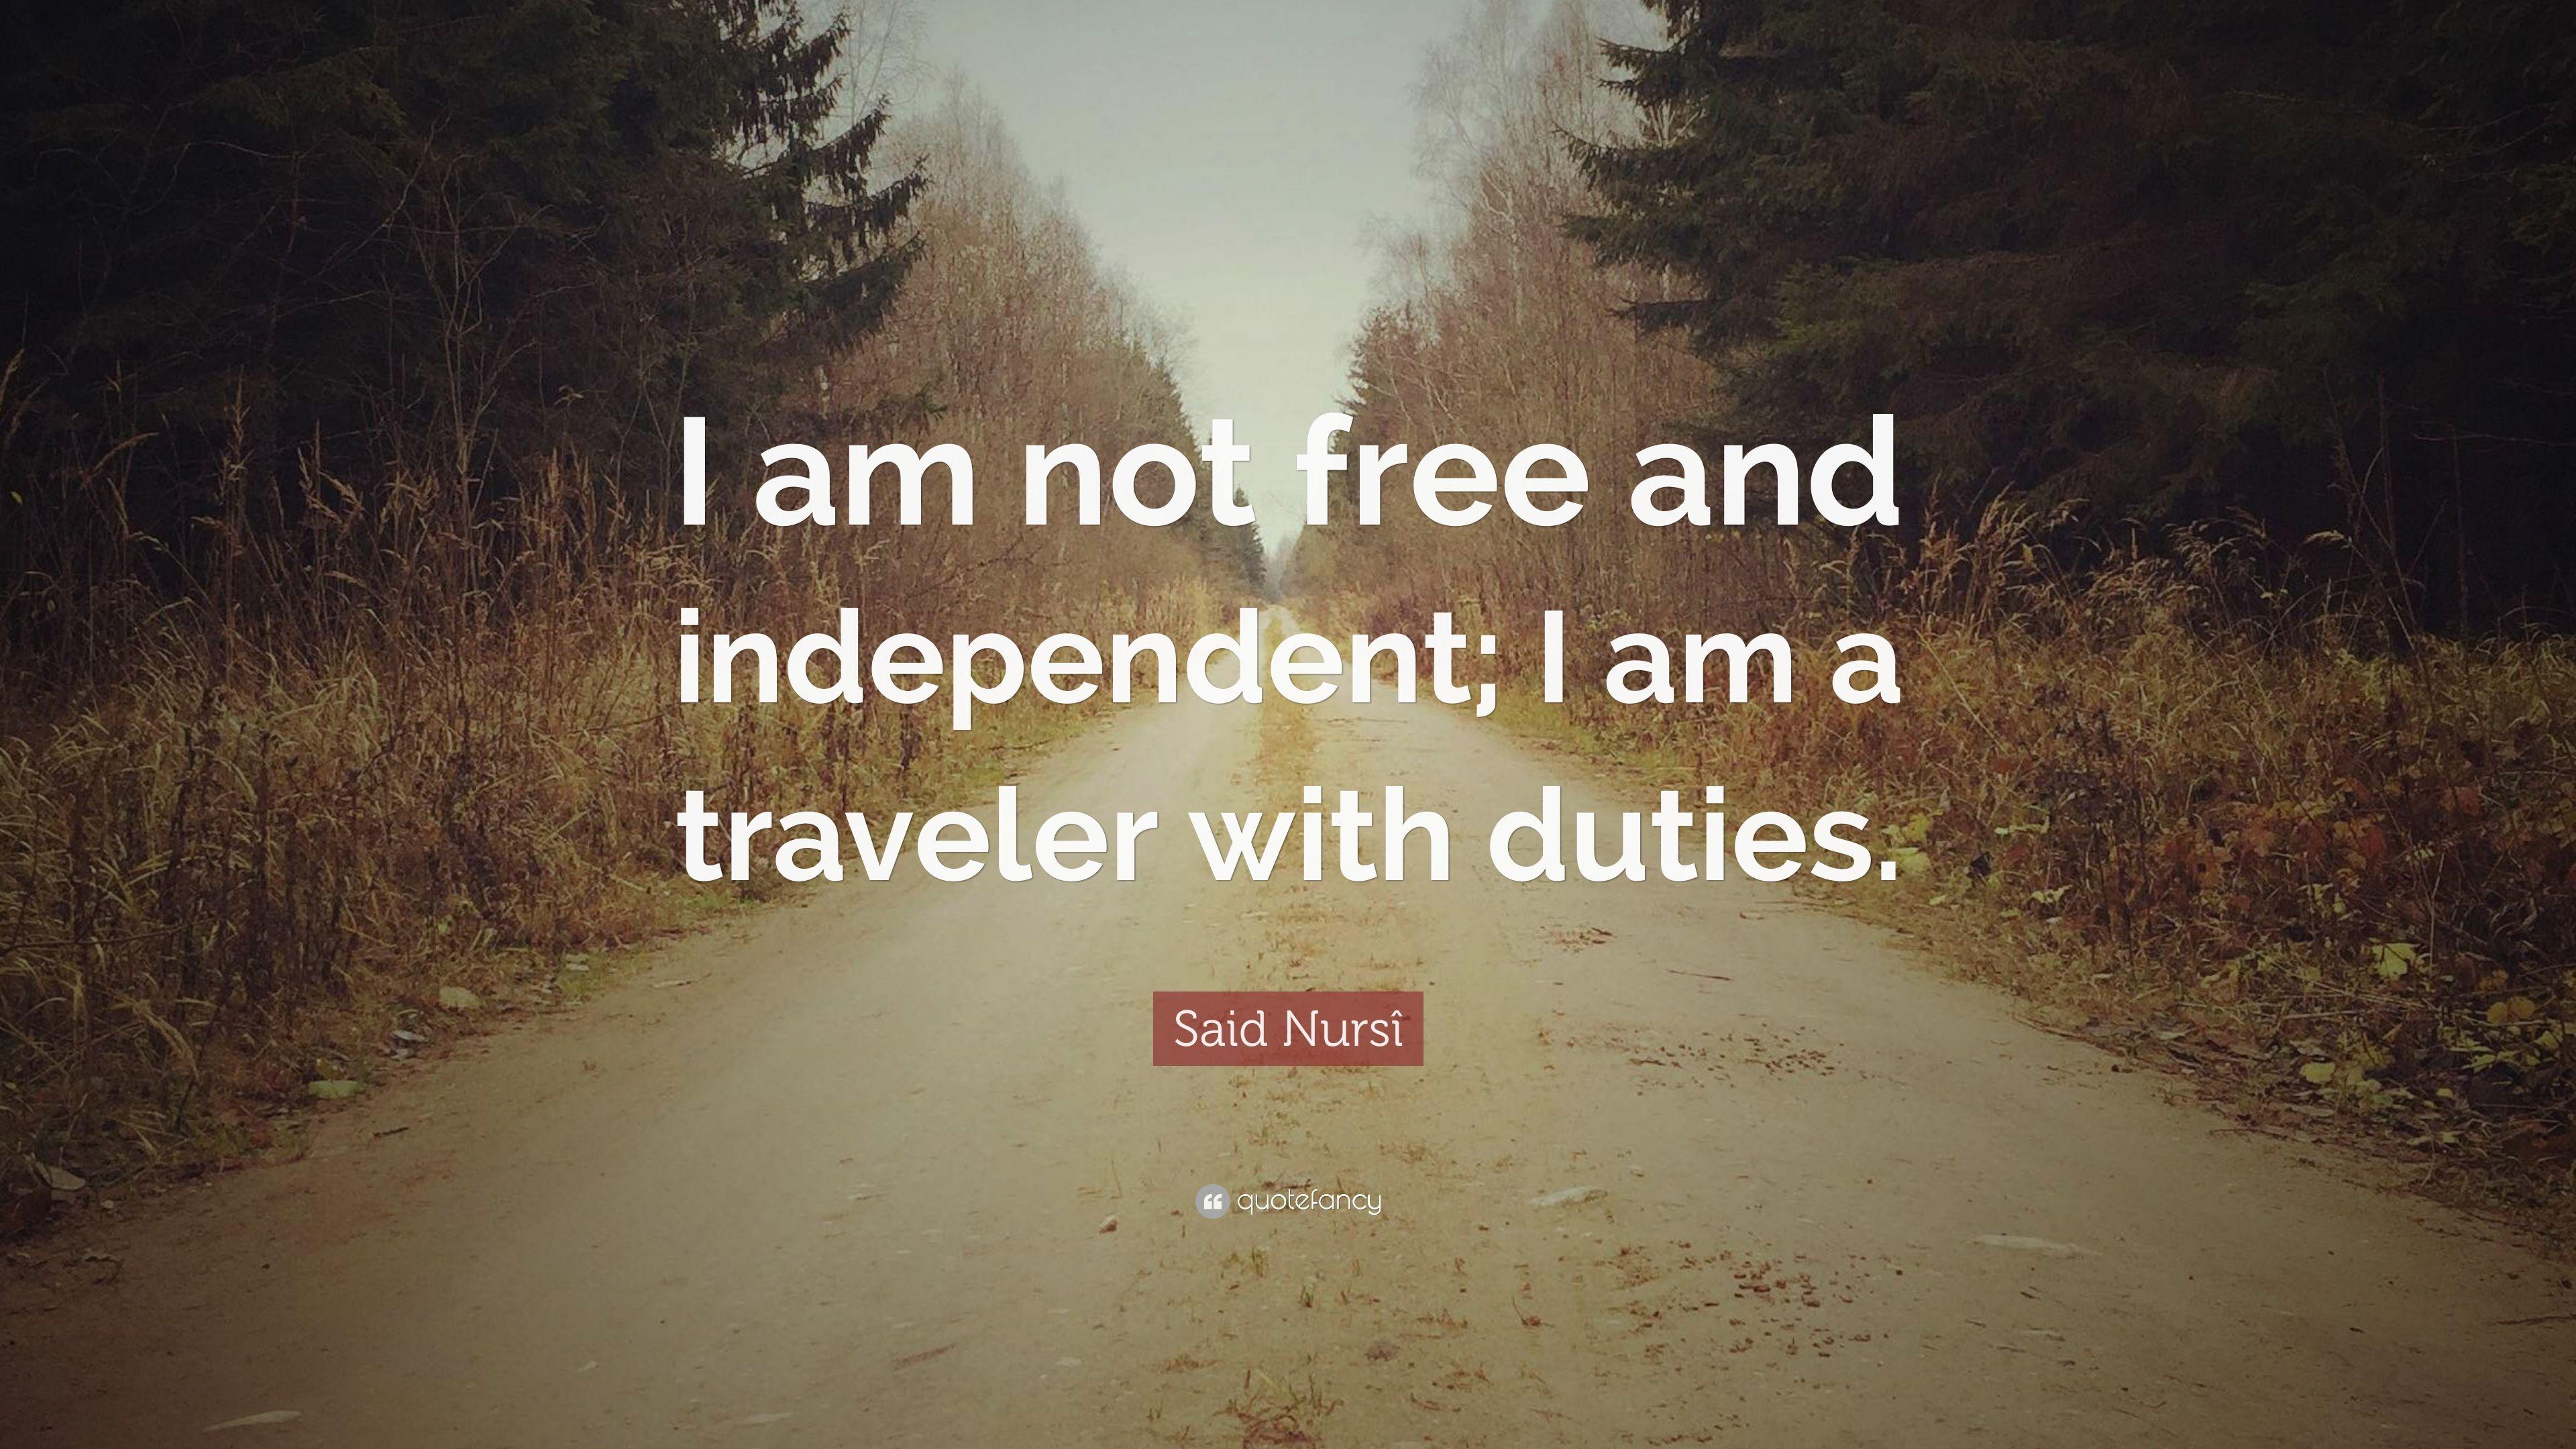 Said Nursî Quote: “I am not free and independent; I am a traveler